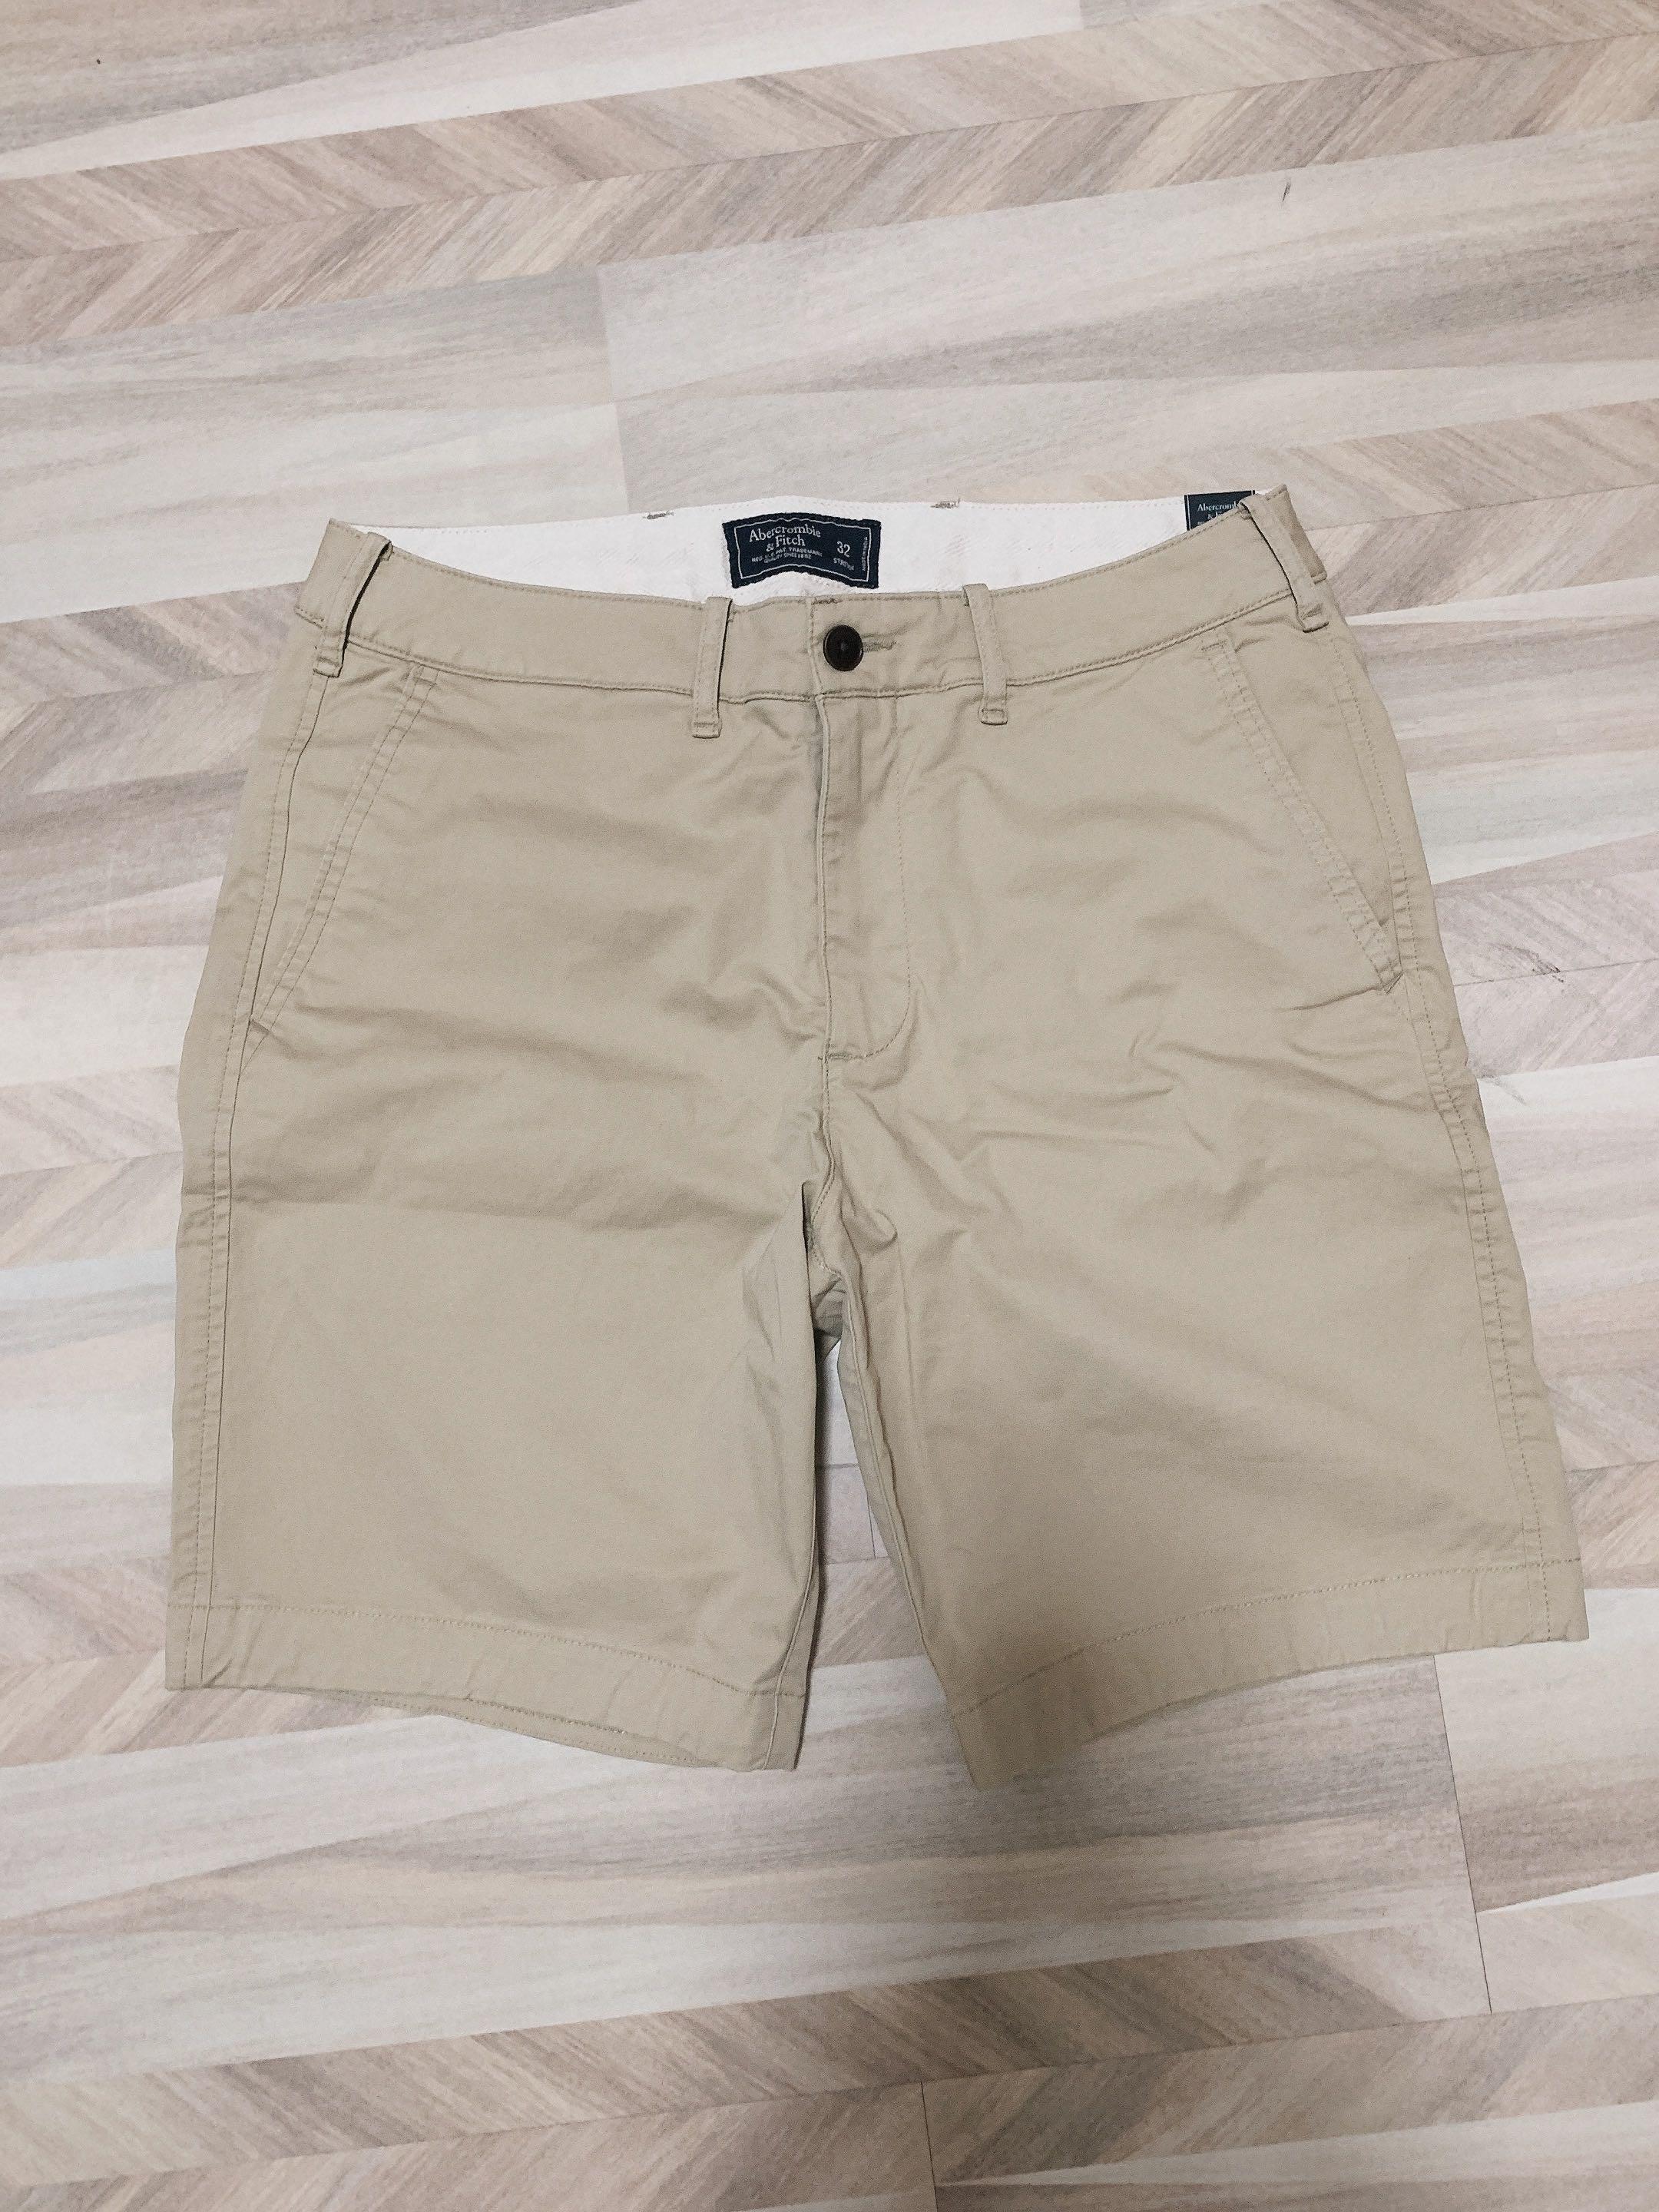 abercrombie and fitch khaki pants